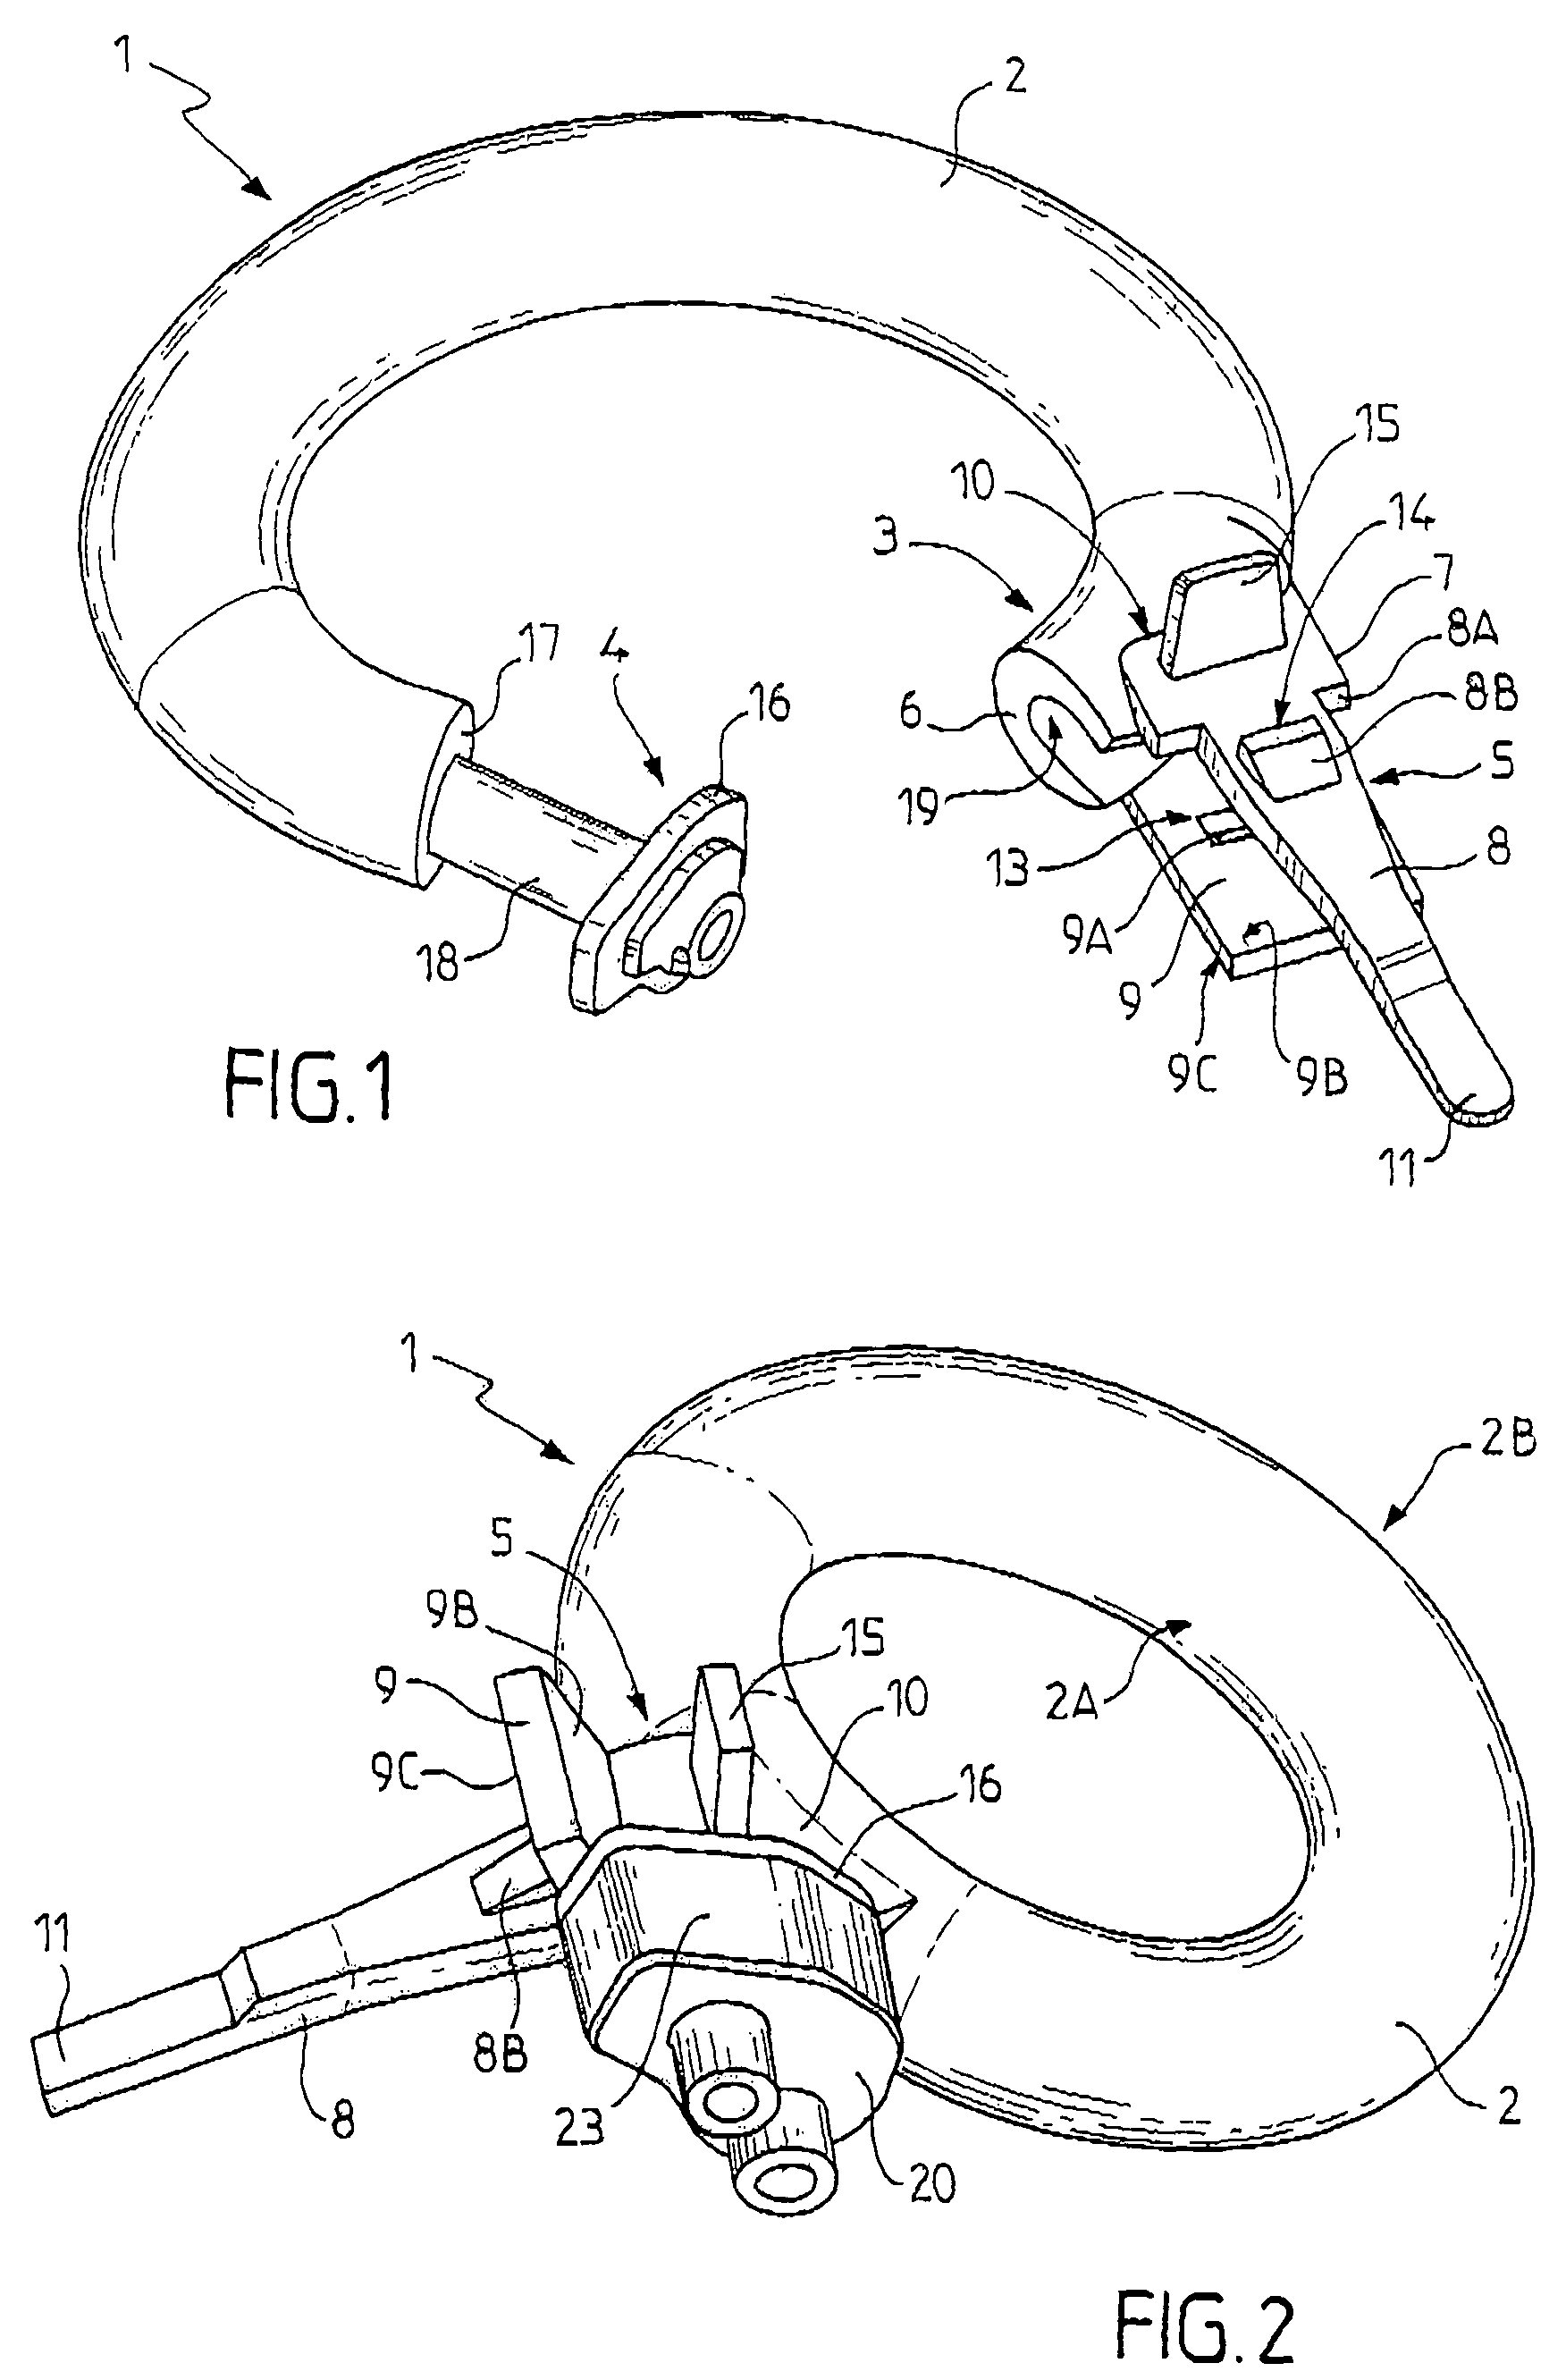 Closure system for surgical ring